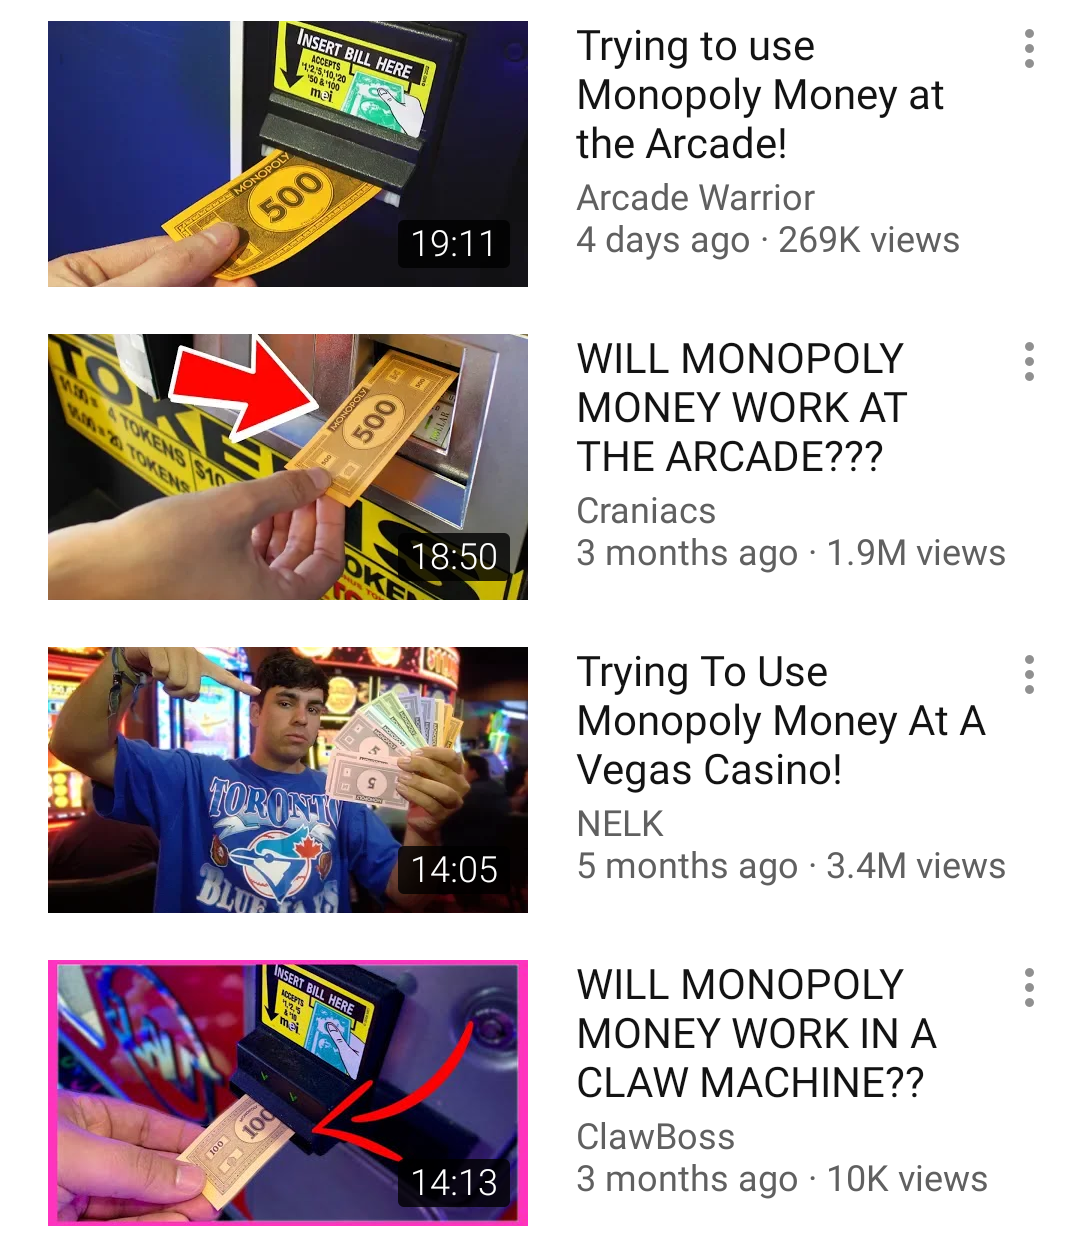 display advertising - Trying to use Monopoly Money at the Arcade! Arcade Warrior 4 days ago views 500 Will Monopoly Money Work At The Arcade??? Craniacs 3 months ago 1.9M views Trying To Use Monopoly Money At A Vegas Casino! Nelk 5 months ago 3.4M views W